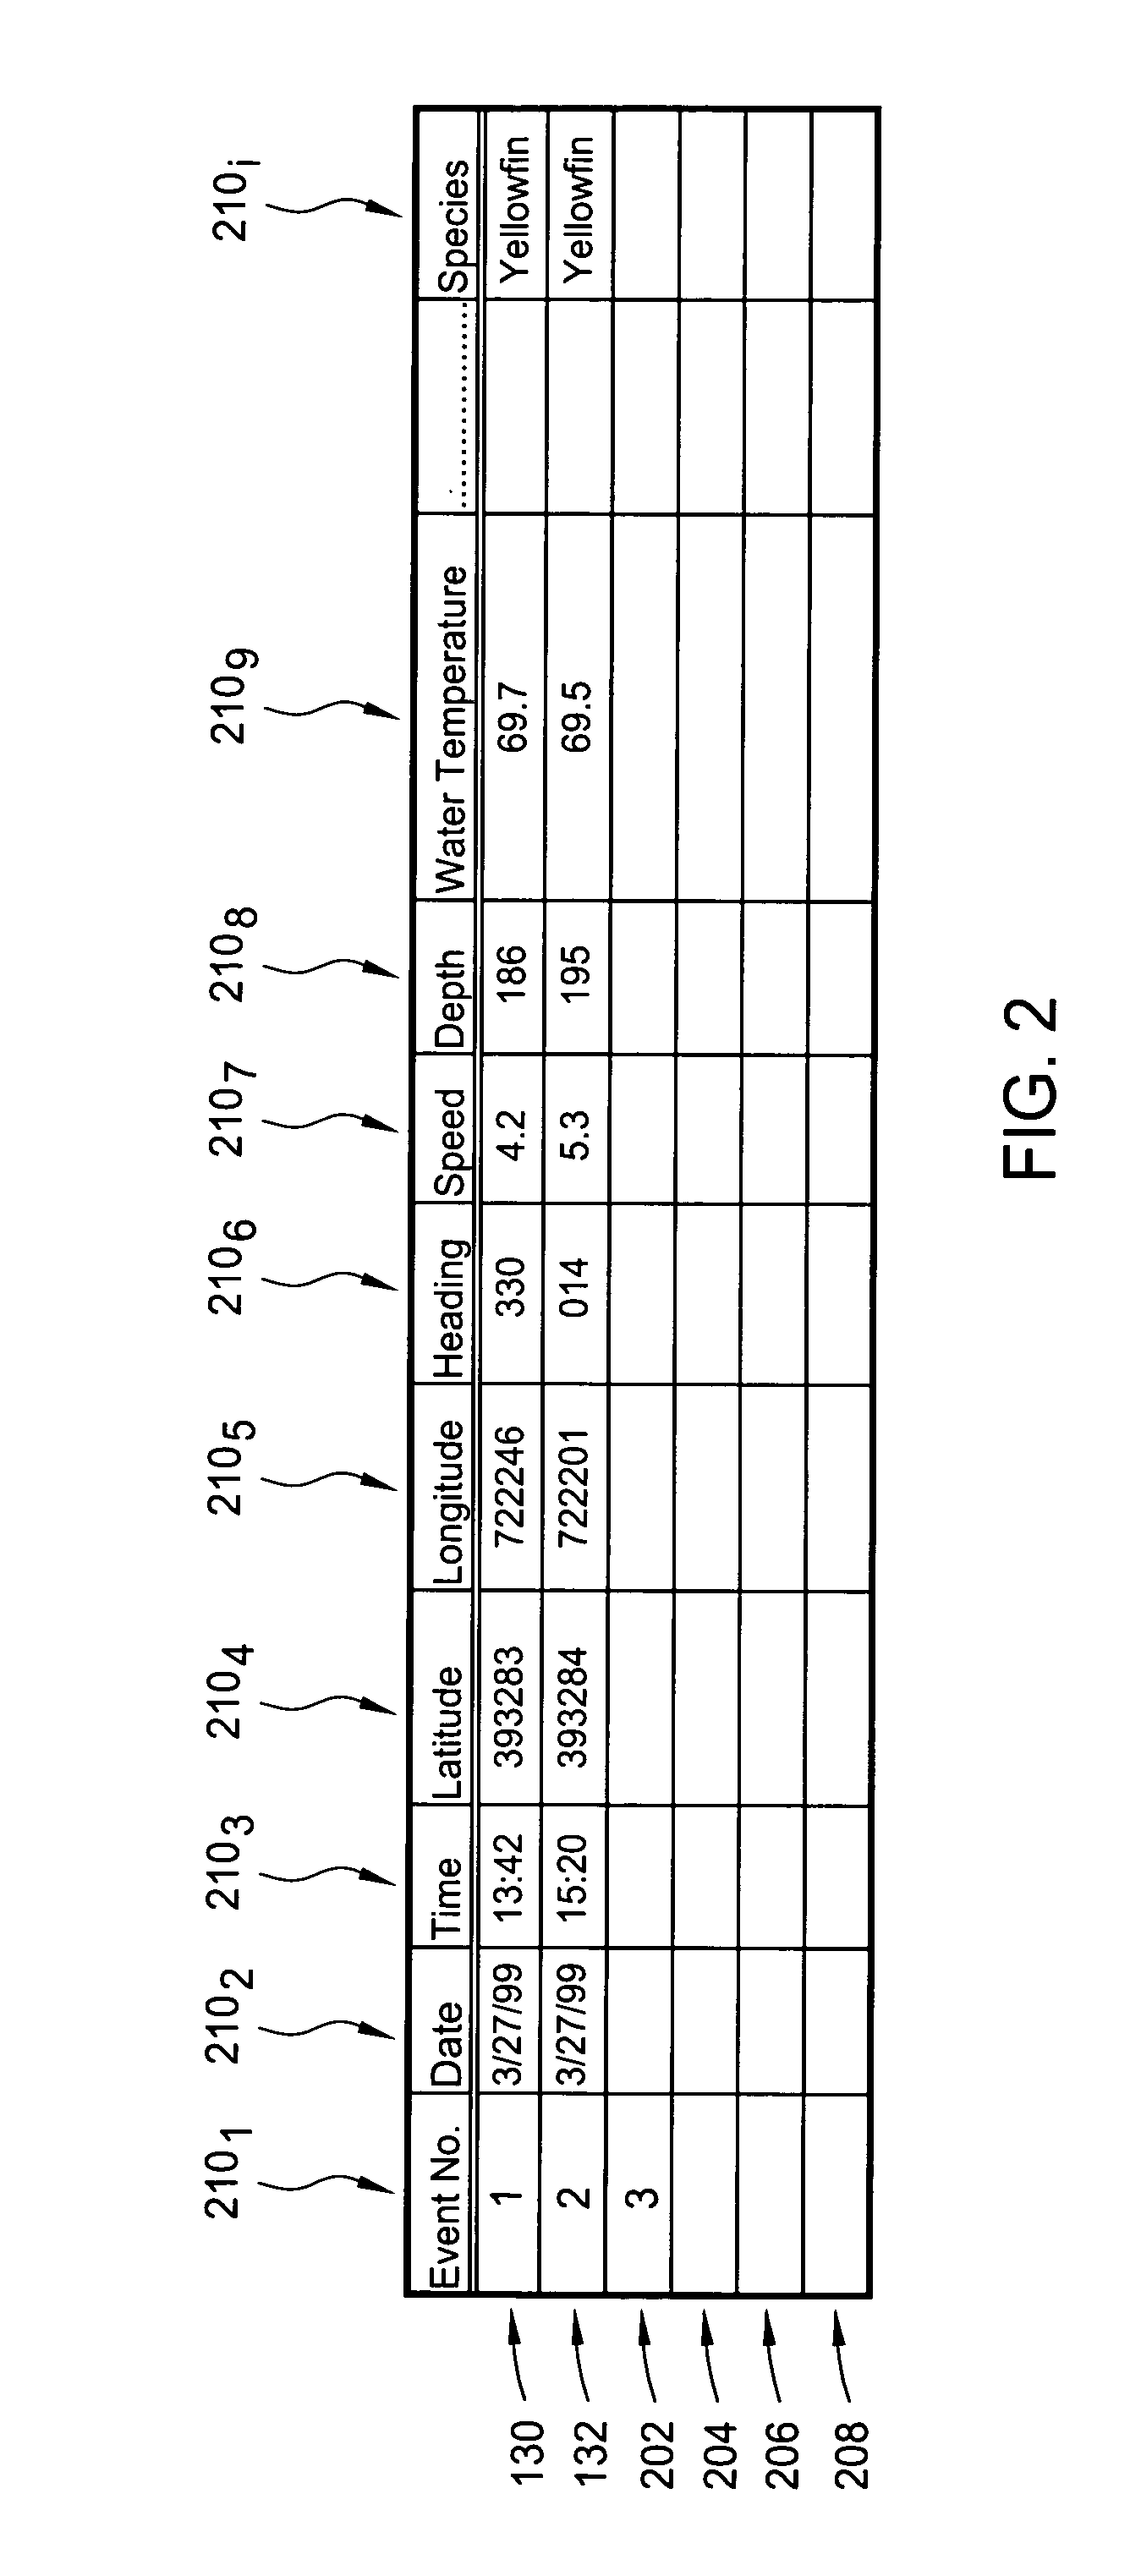 Device for automated fishing information acquistion